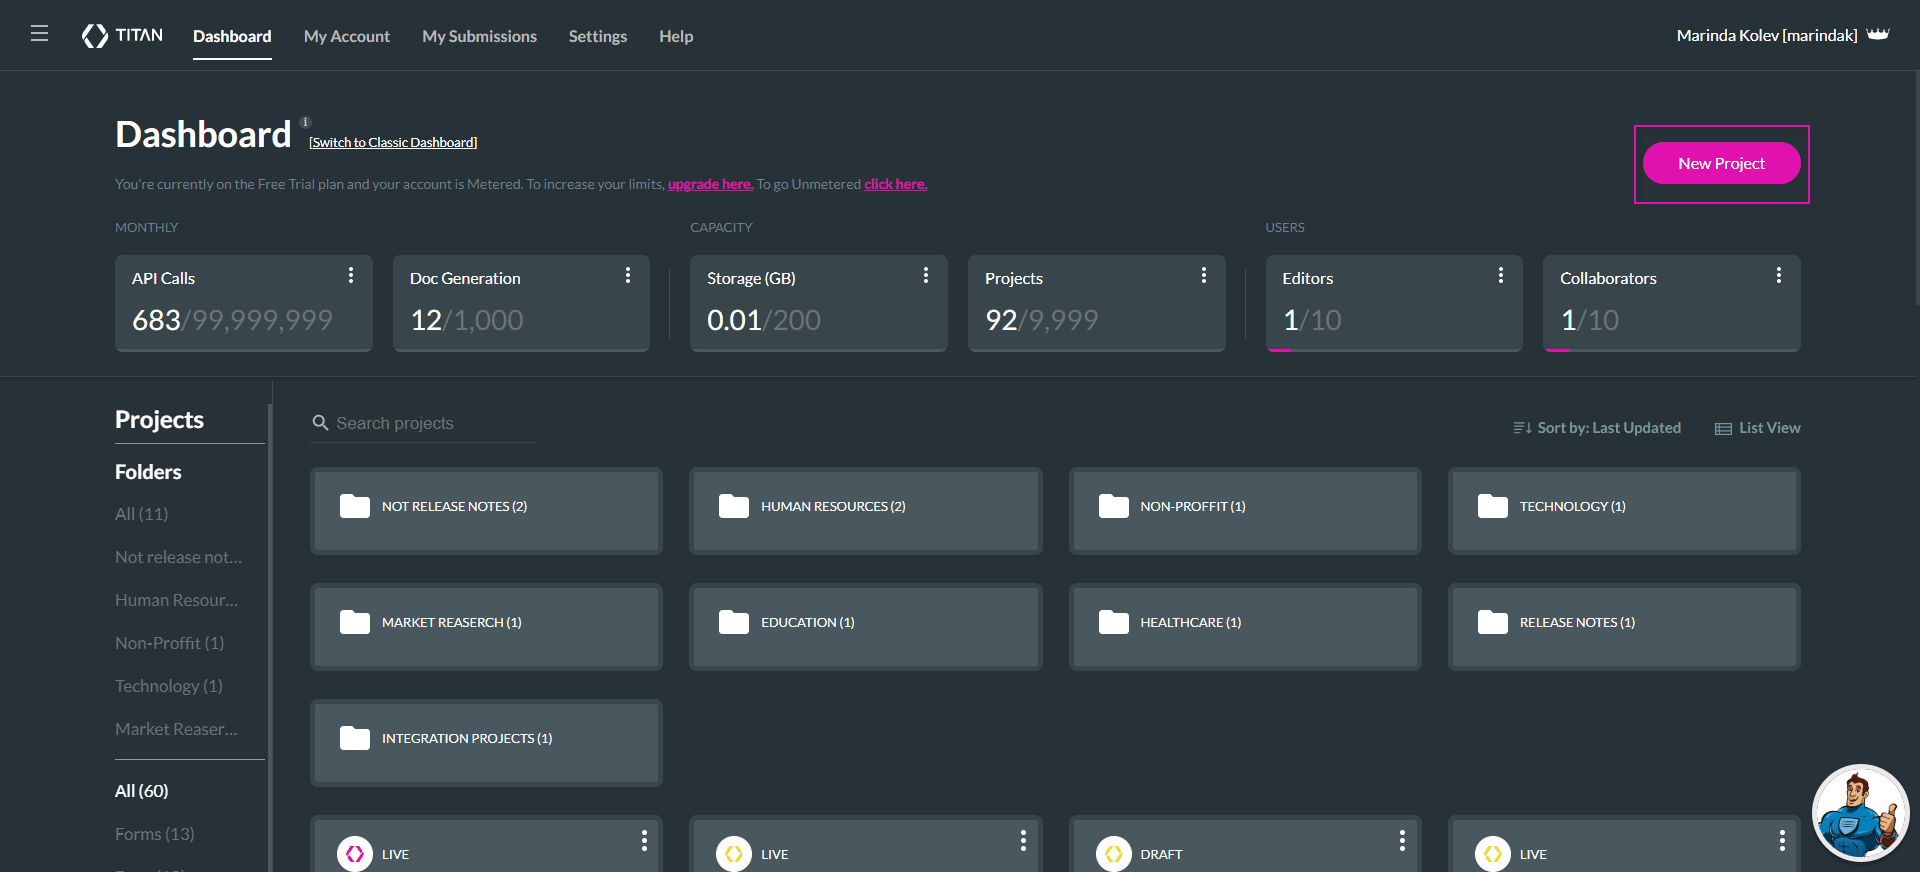 New Project button on Titan Dashboard